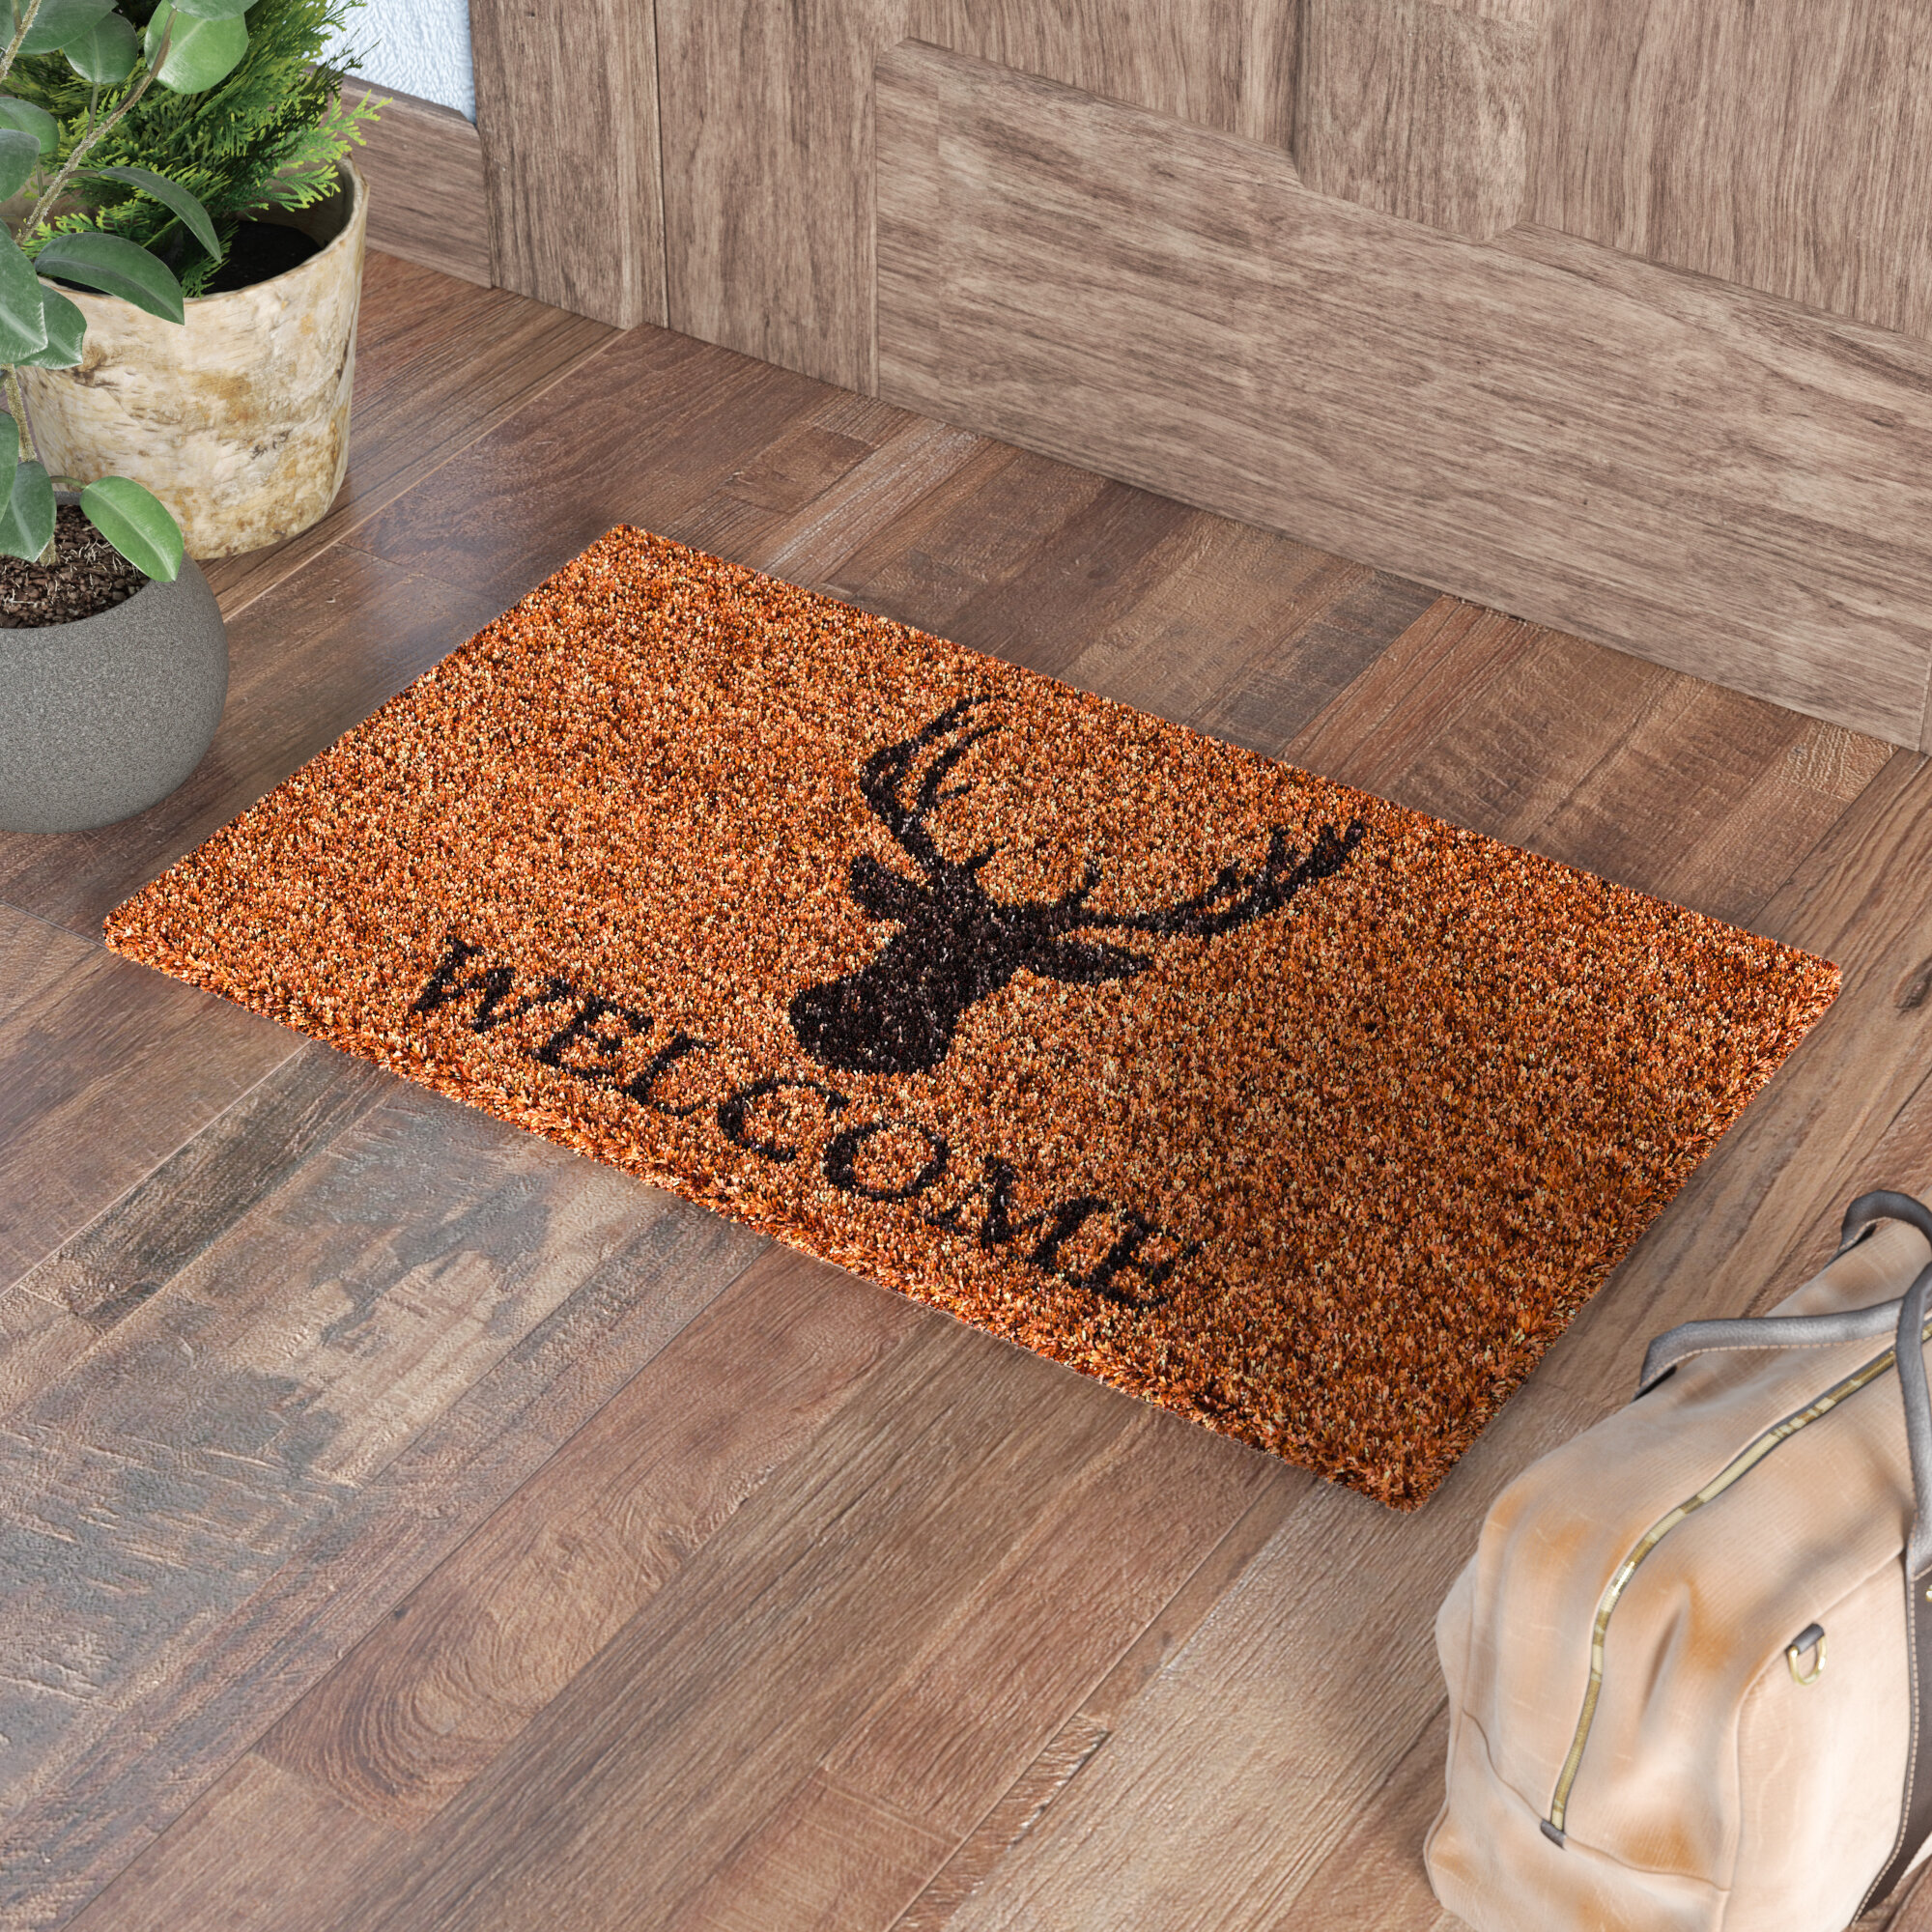 Rustic Cabin Vibes with Layered Front Door Mats